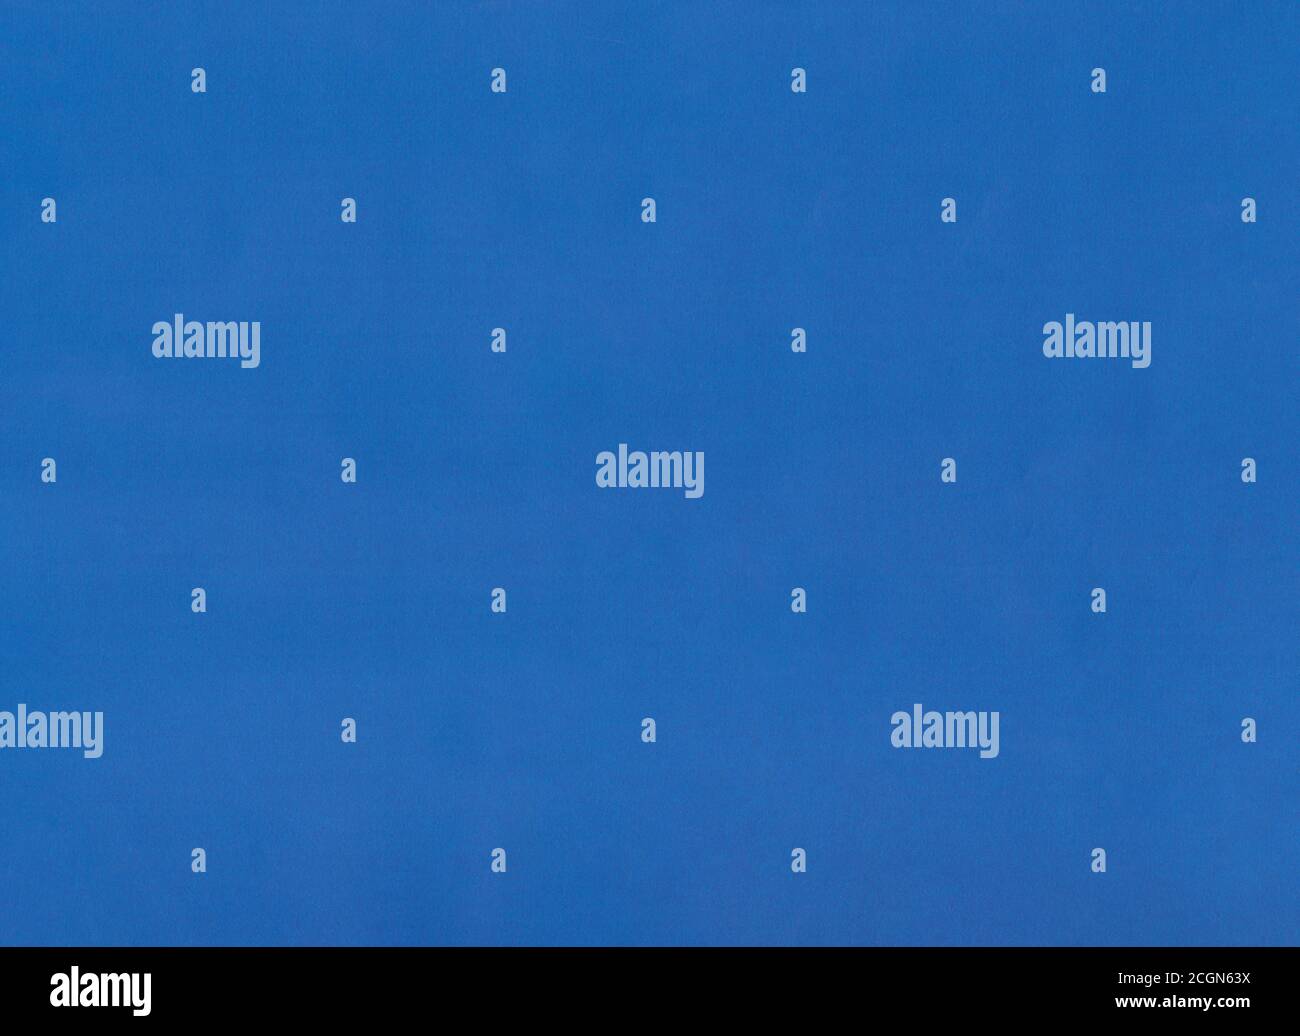 Smooth blue art paper for background design. Stock Photo